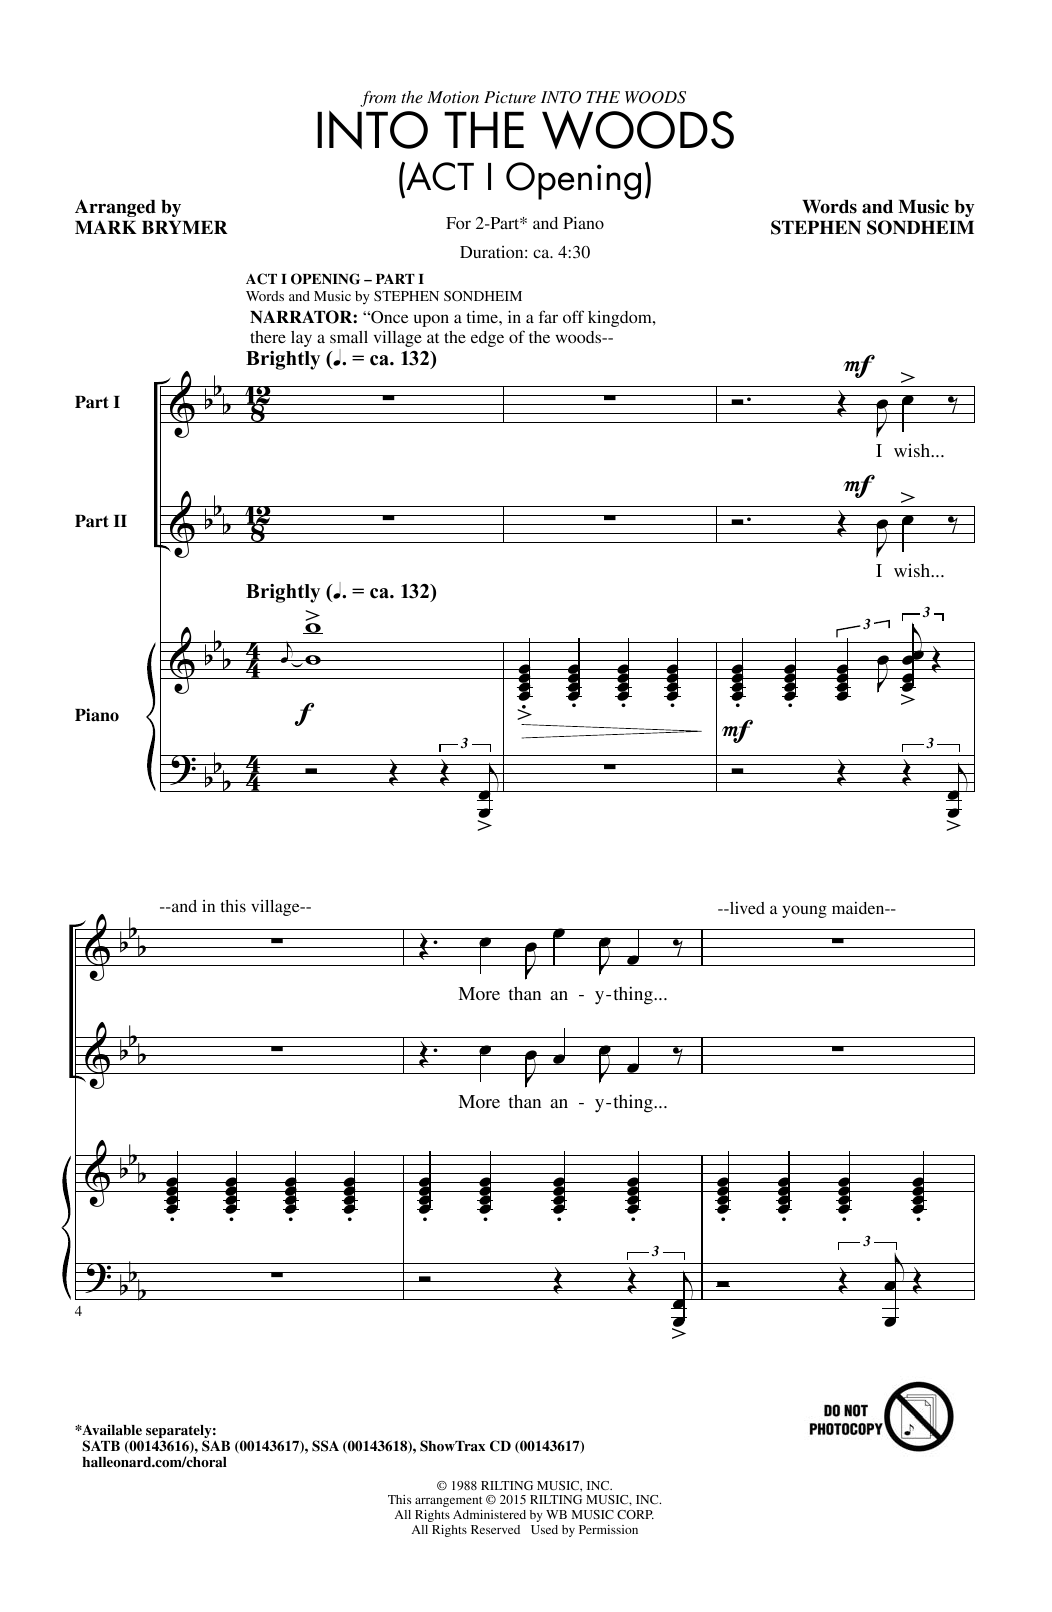 Download Stephen Sondheim Into The Woods (Act I Opening) - Part I Sheet Music